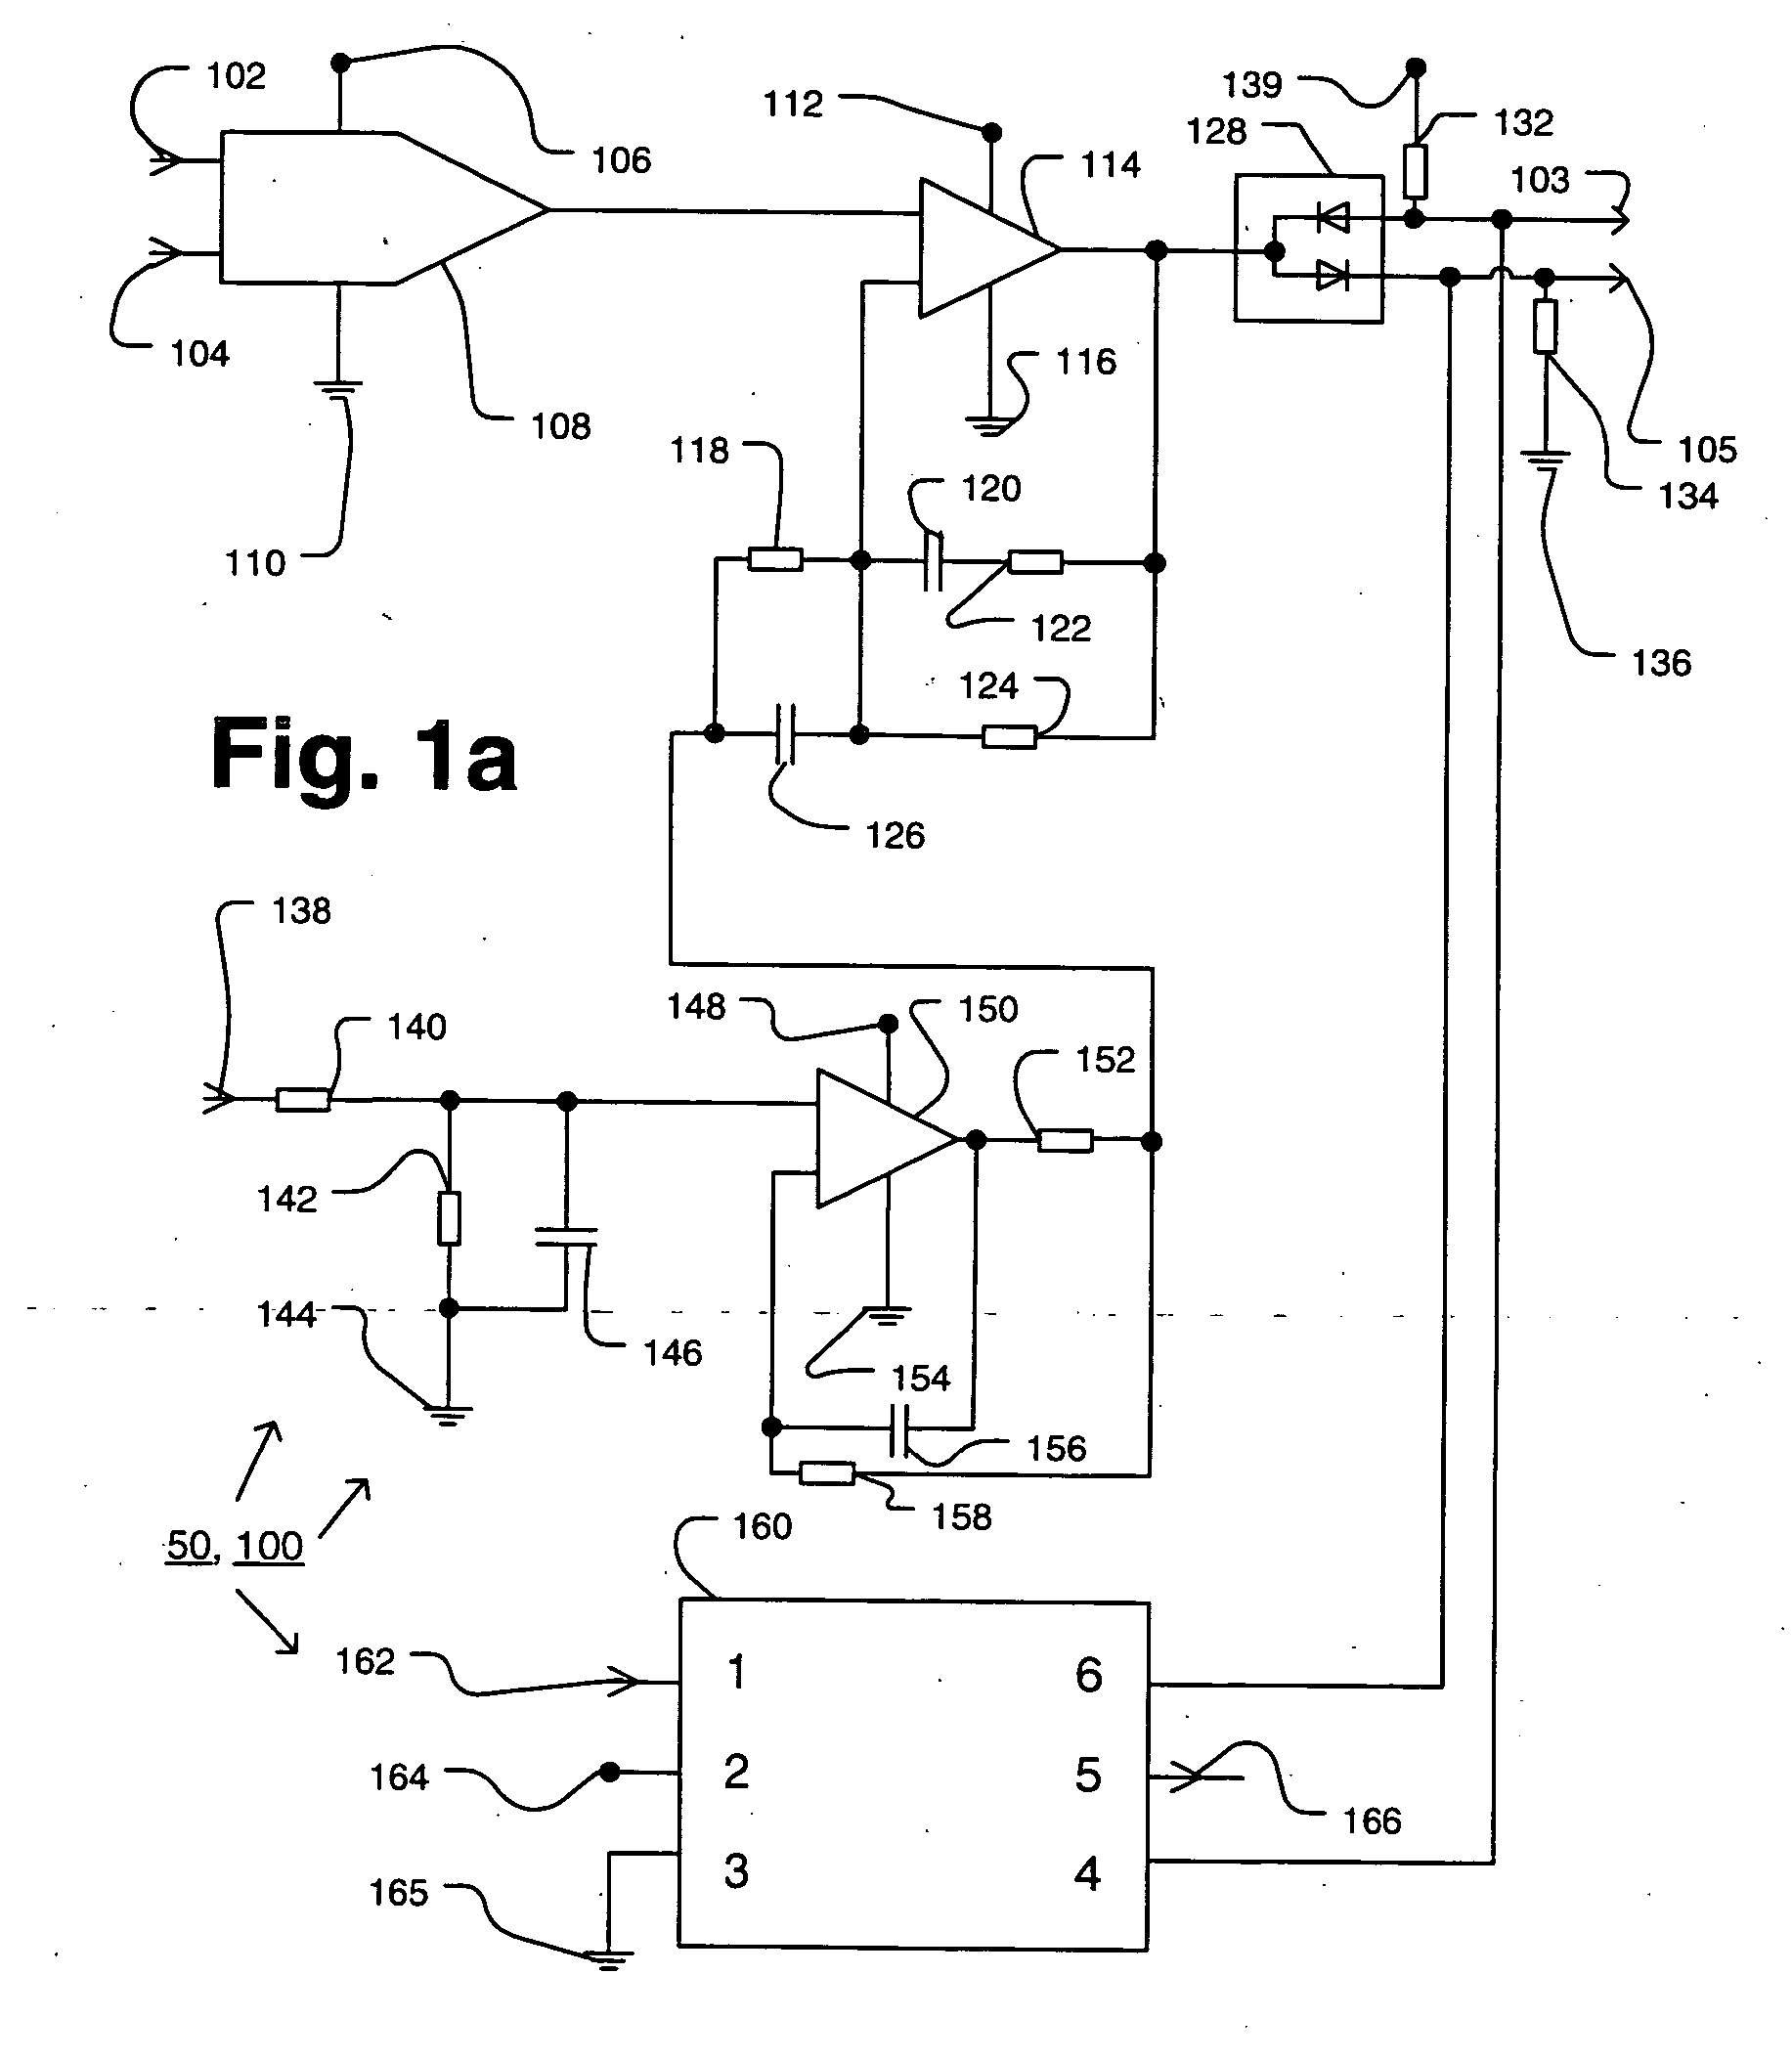 Power supply with multiple modes of operation